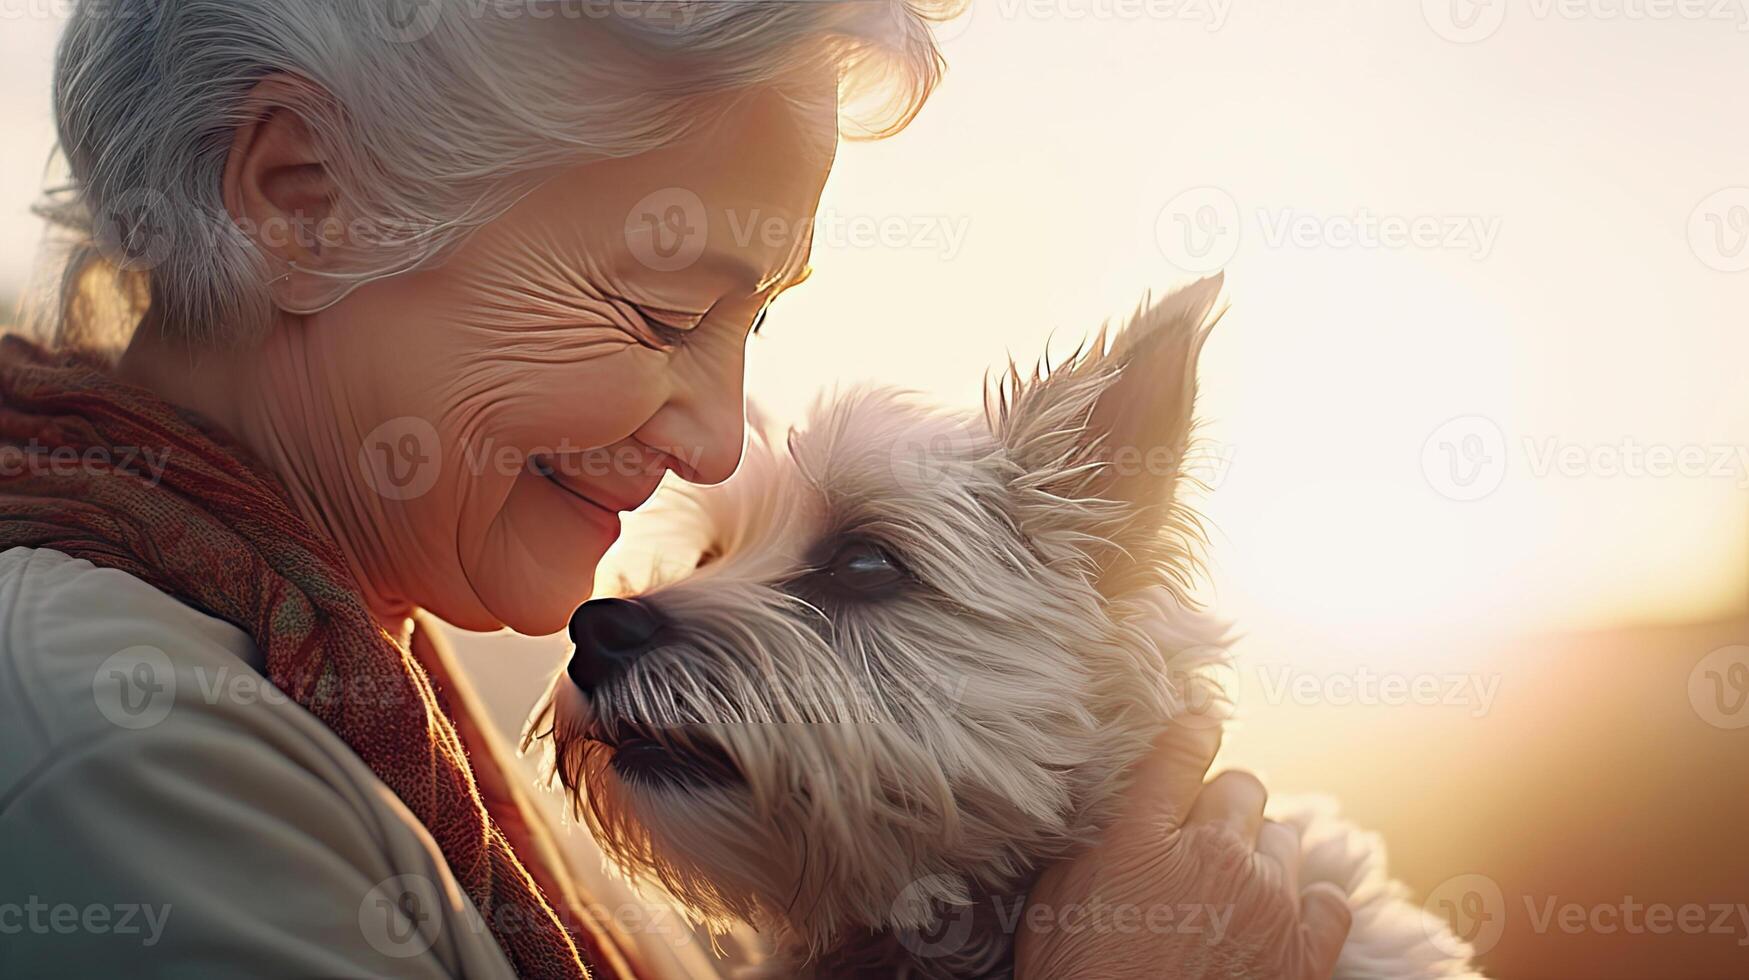 AI generated Beautiful old lady and white funny dog close-up portrait in backlight. Friendship and tender feelings between human and animal concept. AI generated illustration. photo